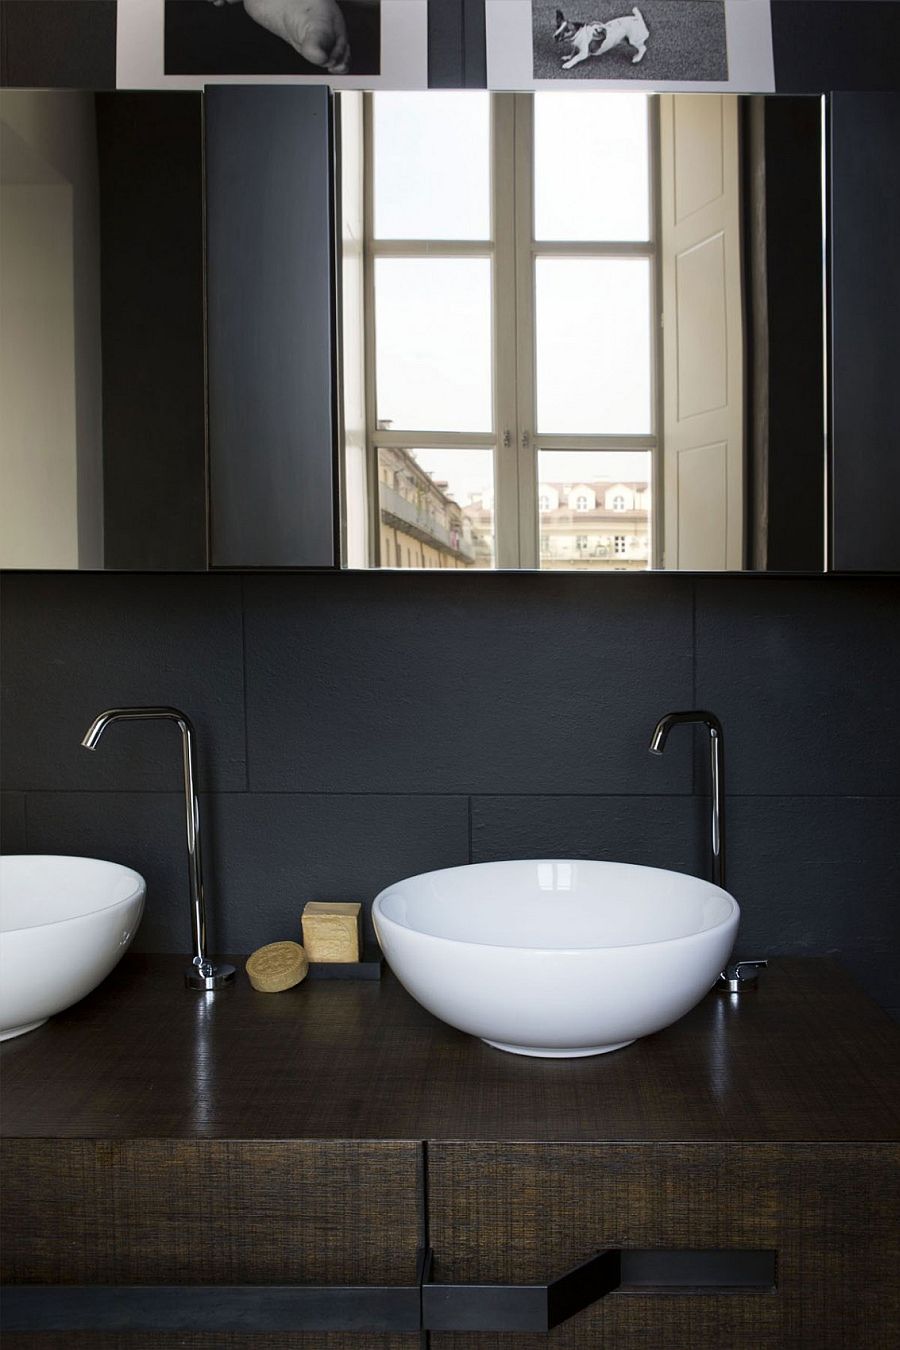 Black backdrop and white sinks along with a wooden vanity in the bathroom